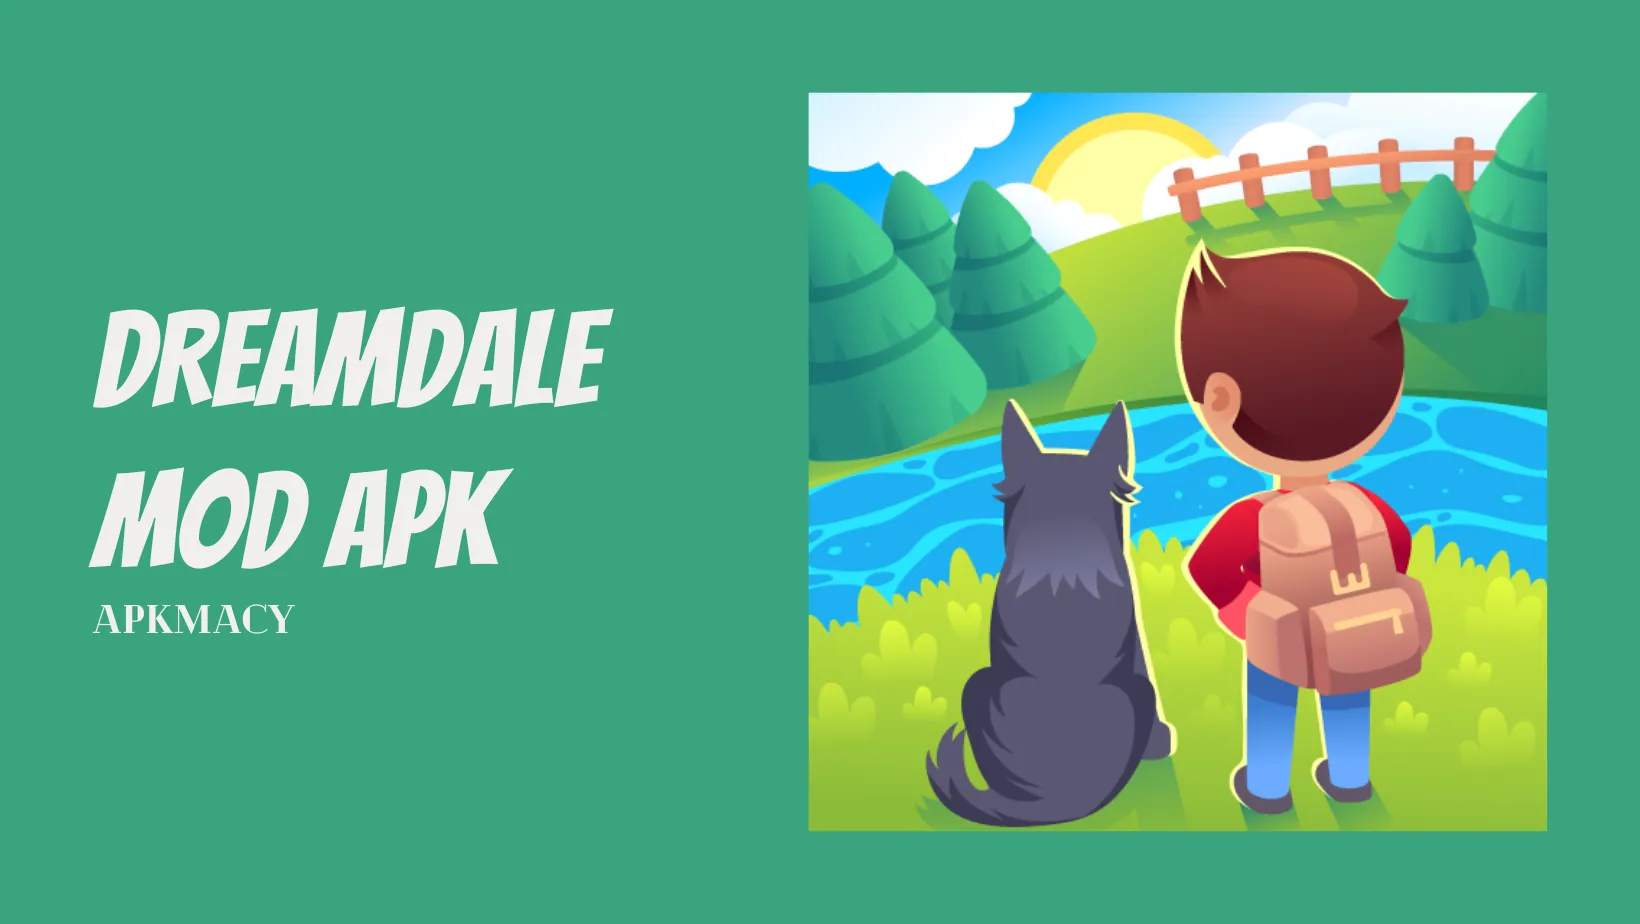 Dreamdale Fairy Adventure Mobile Game hack mod apk unlimited Unlocked  download android ios pc